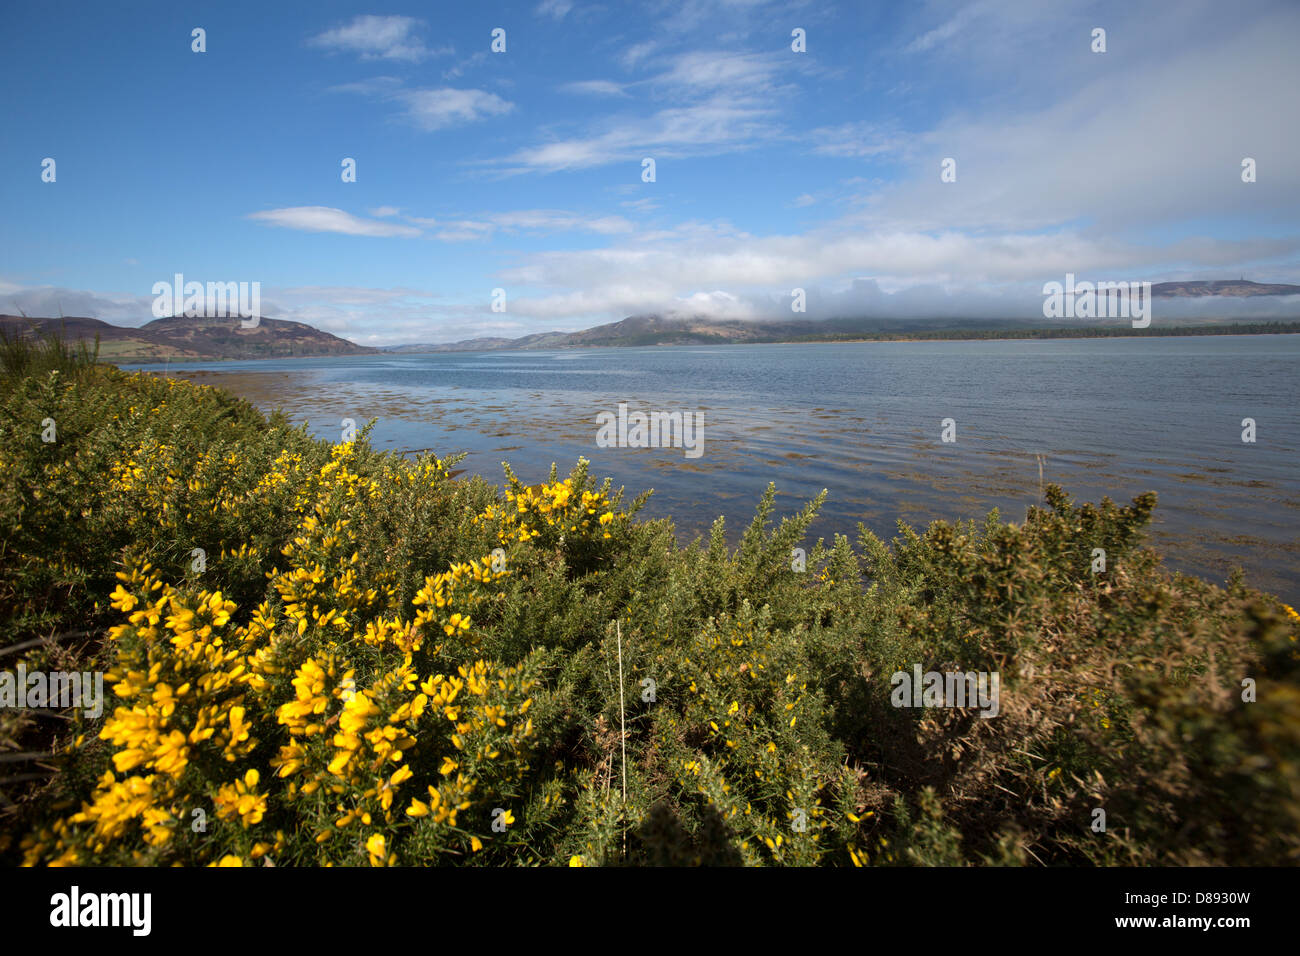 Loch Fleet, Scotland. Loch Fleet with cloud covered Balblair Wood, Mound Rock, Silver Rock and Princess Cairn in the background. Stock Photo